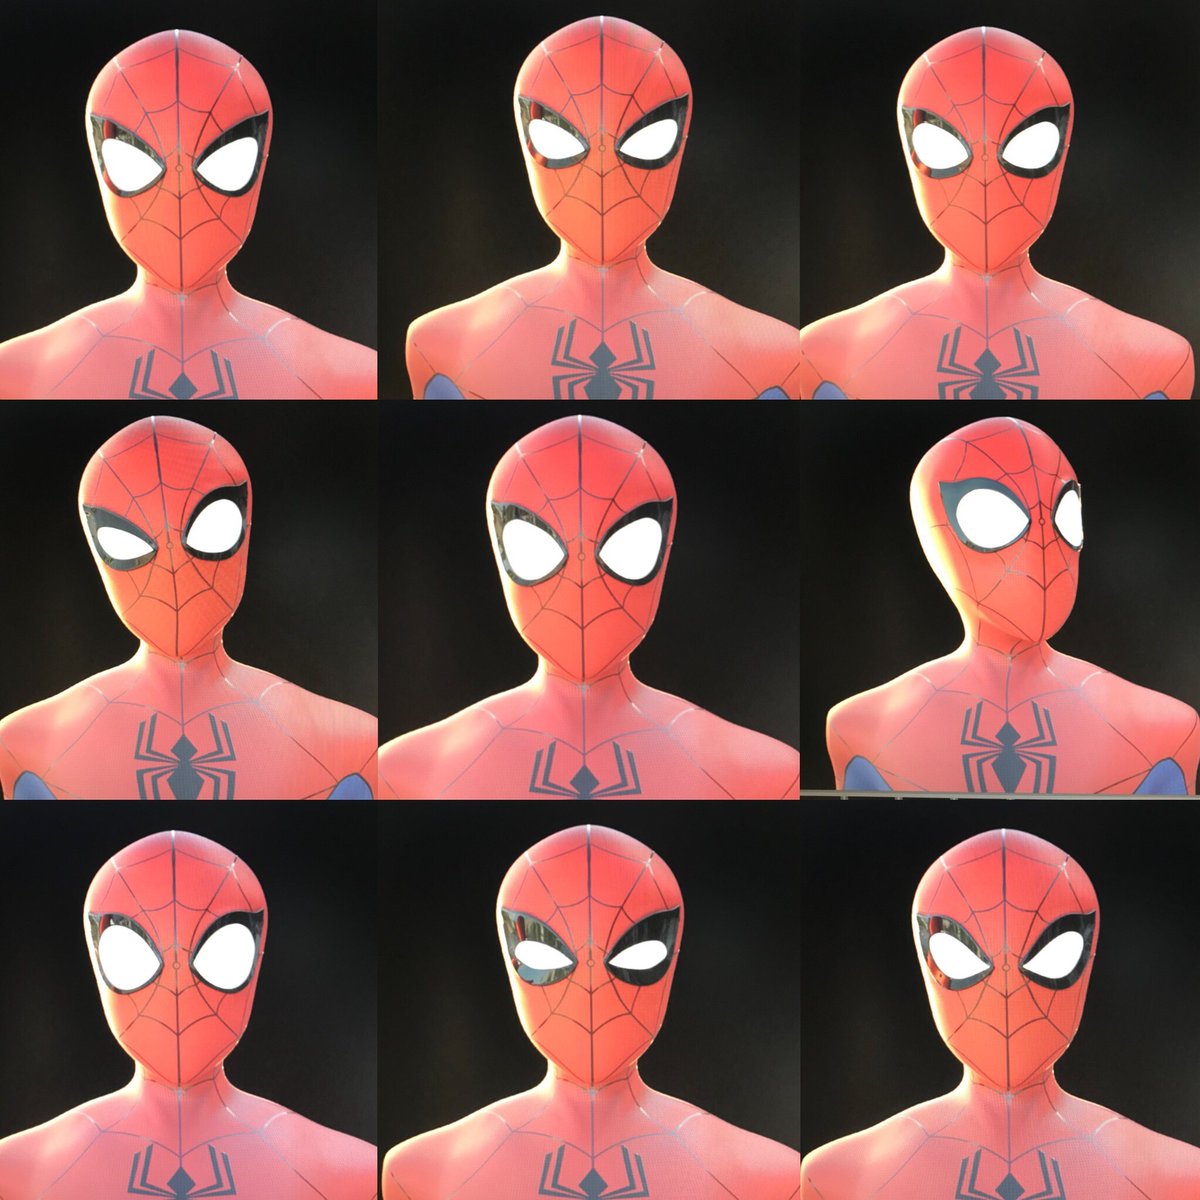 RT @EARTH_26496: Spectacular Spider-Man facial expressions!
Render by Bryce Lennox on ArtStation! https://t.co/asnJeH3vuL